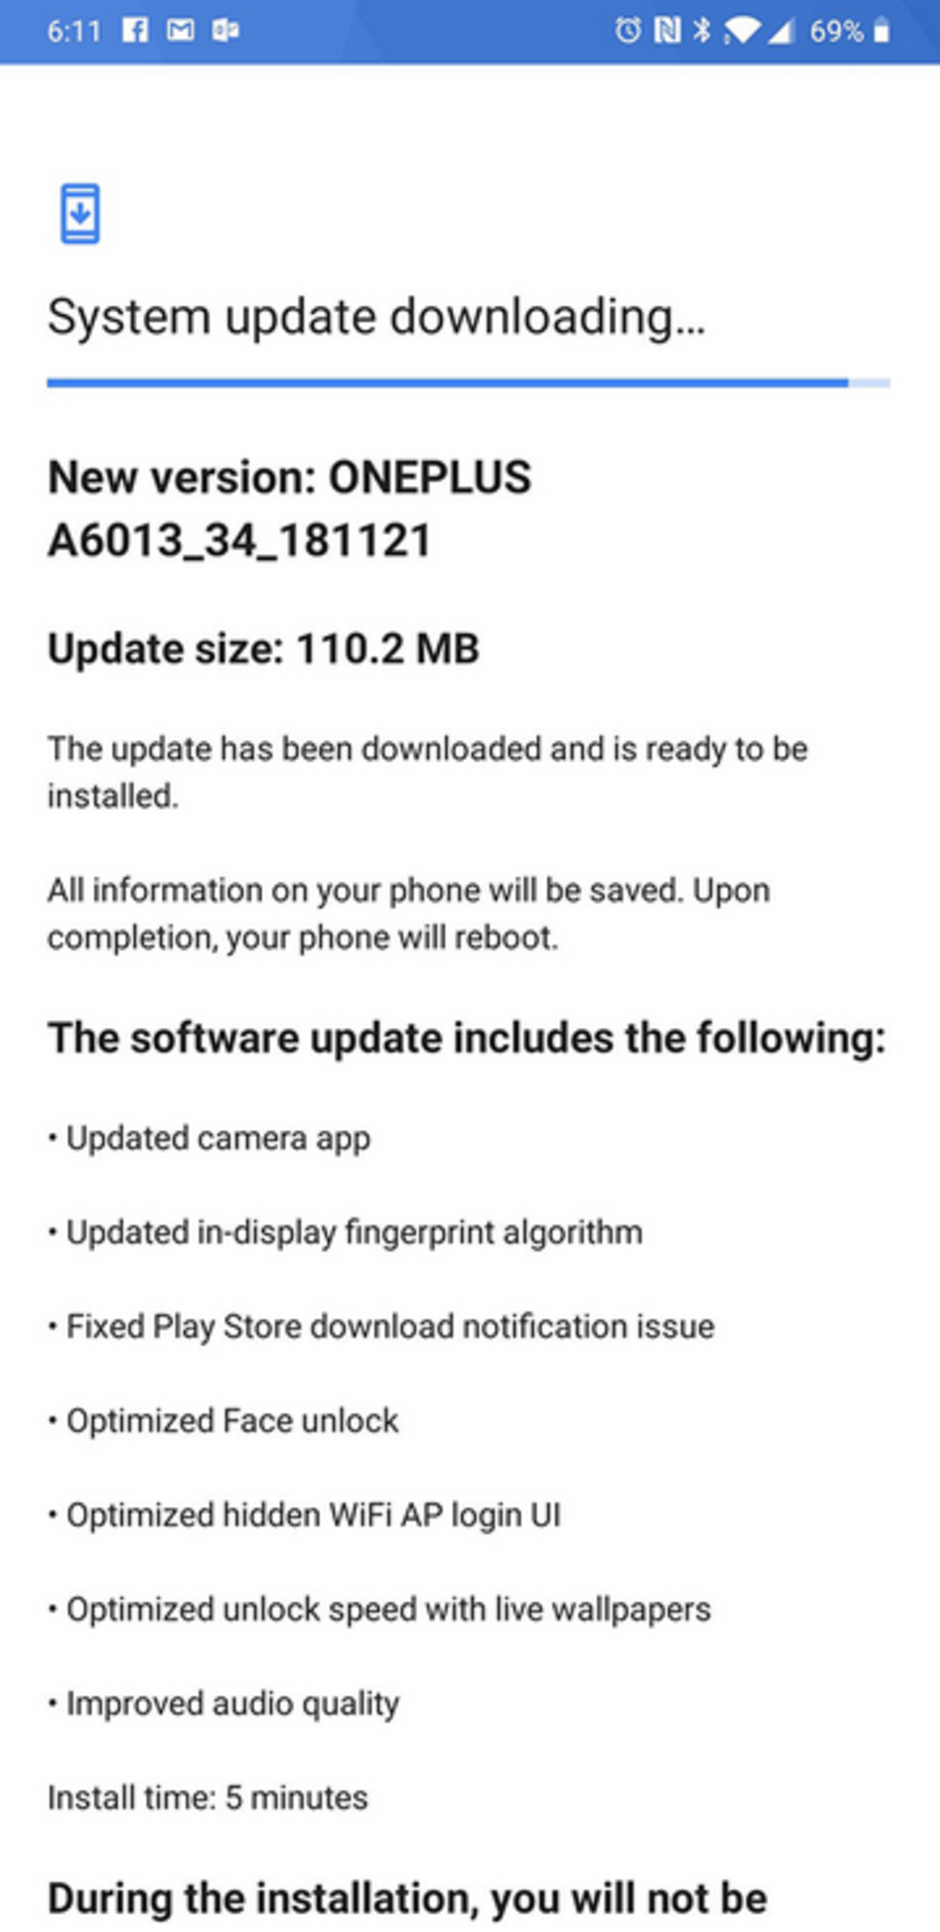 T-Mobile is disseminating an update to the OnePlus 6T - T-Mobile update for OnePlus 6T includes changes to the camera app, improved audio quality and more